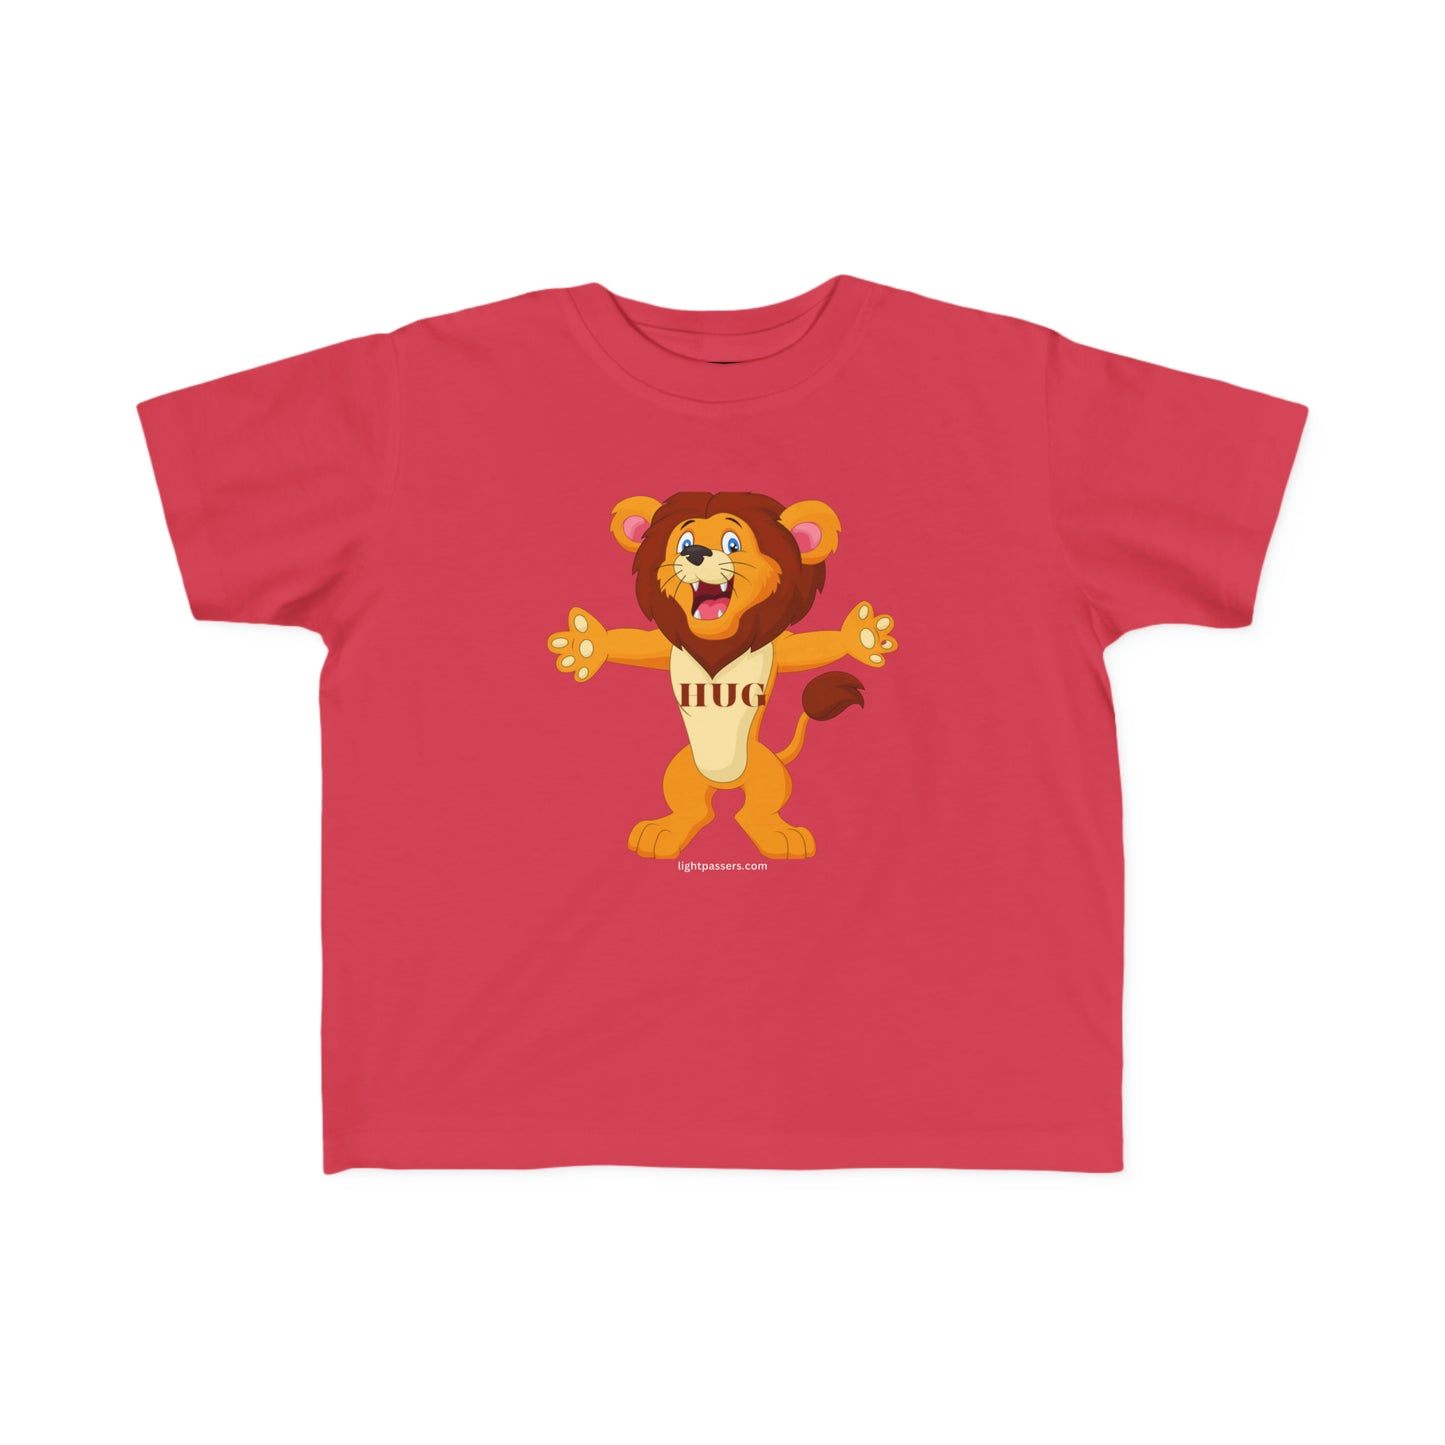 Light Passers Marketplace Give me a Hug Toddler soft T-shirt Simple Messages, Mental Health